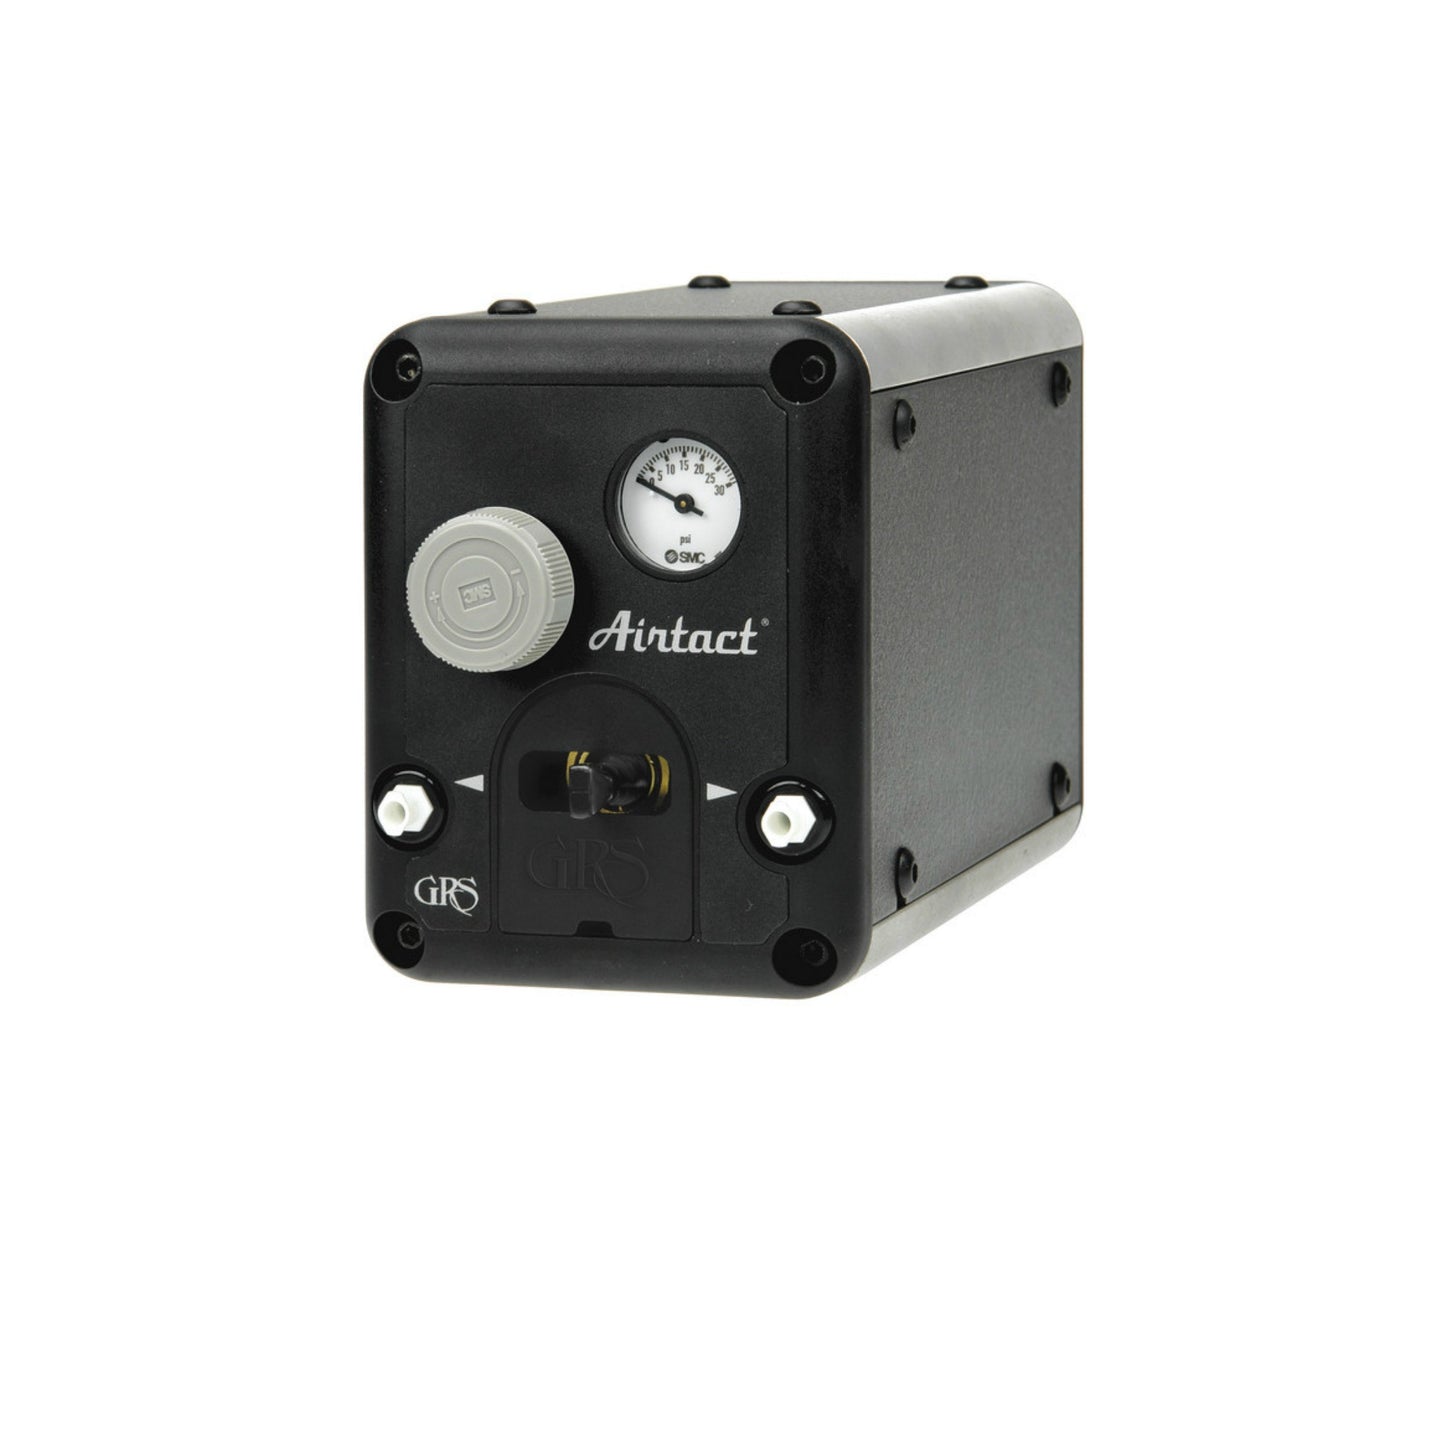 GRS® Airtact Control System